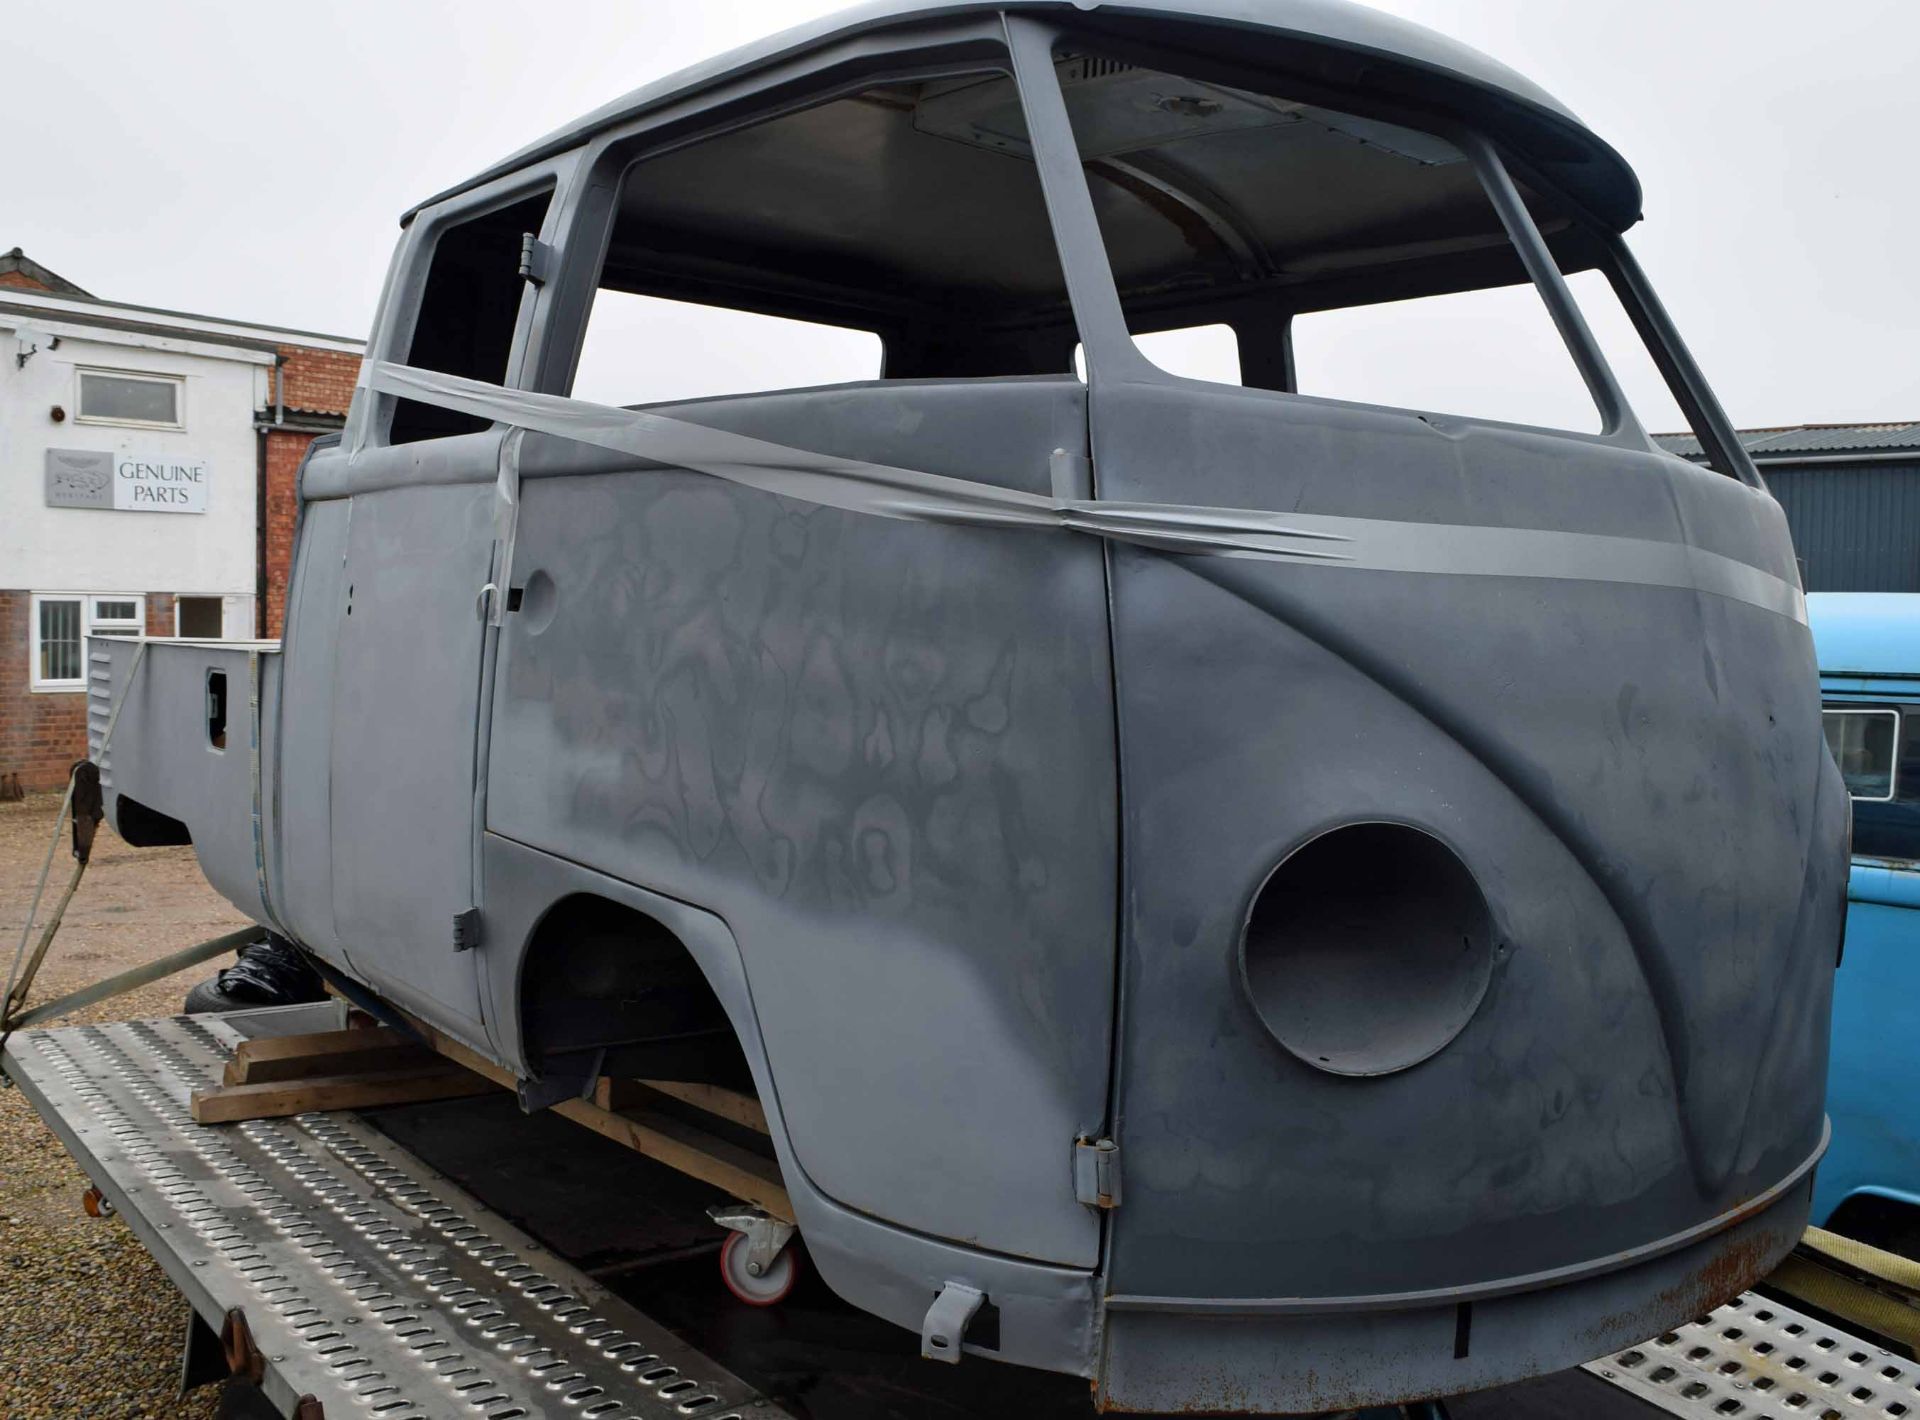 1966 VOLKSWAGEN Kombi Split Screen Crew Cab Pick-Up, Body Shell and Suspension Only (Brazilian - Image 2 of 10